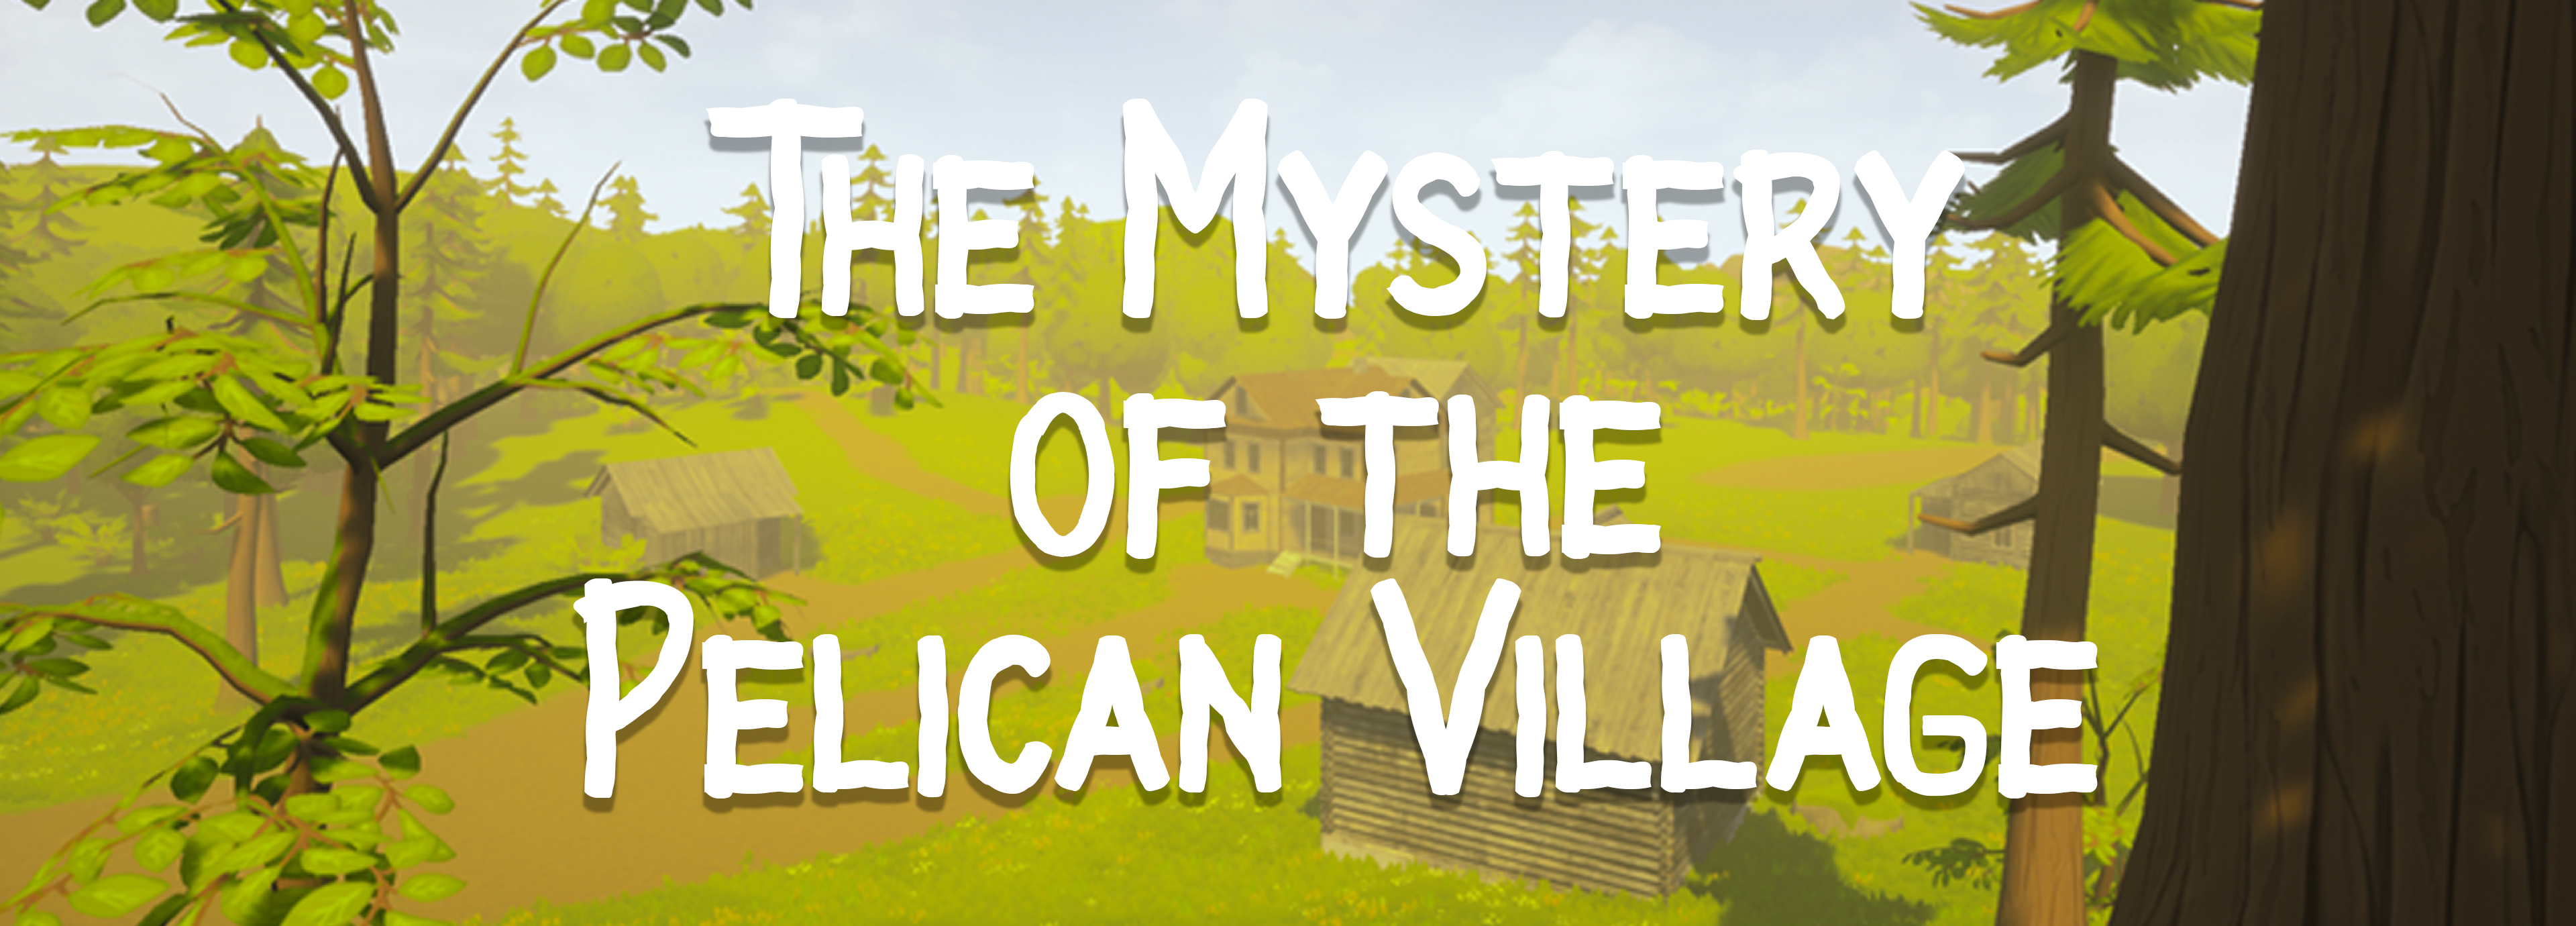 The Mystery of the Pelican Village